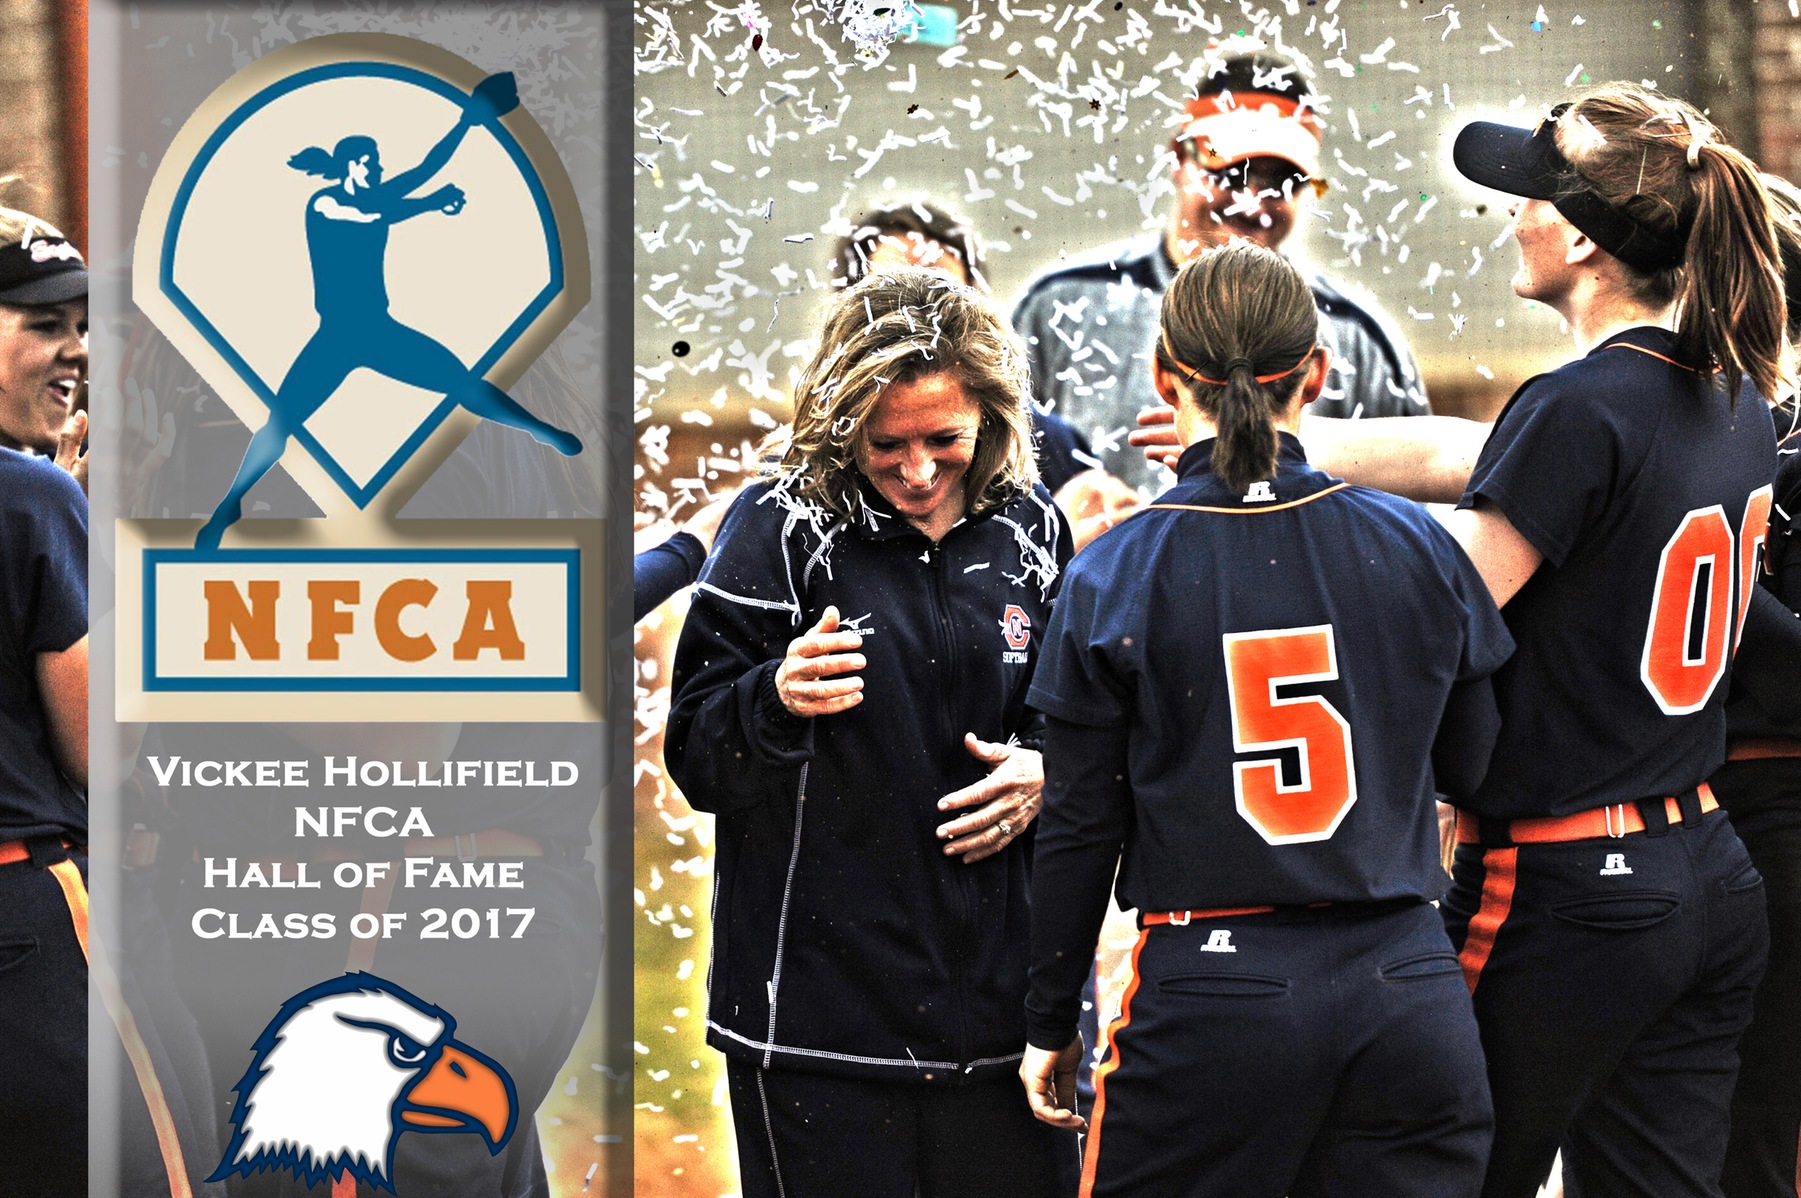 Kazee-Hollifield heads into NFCA Hall of Fame Friday night